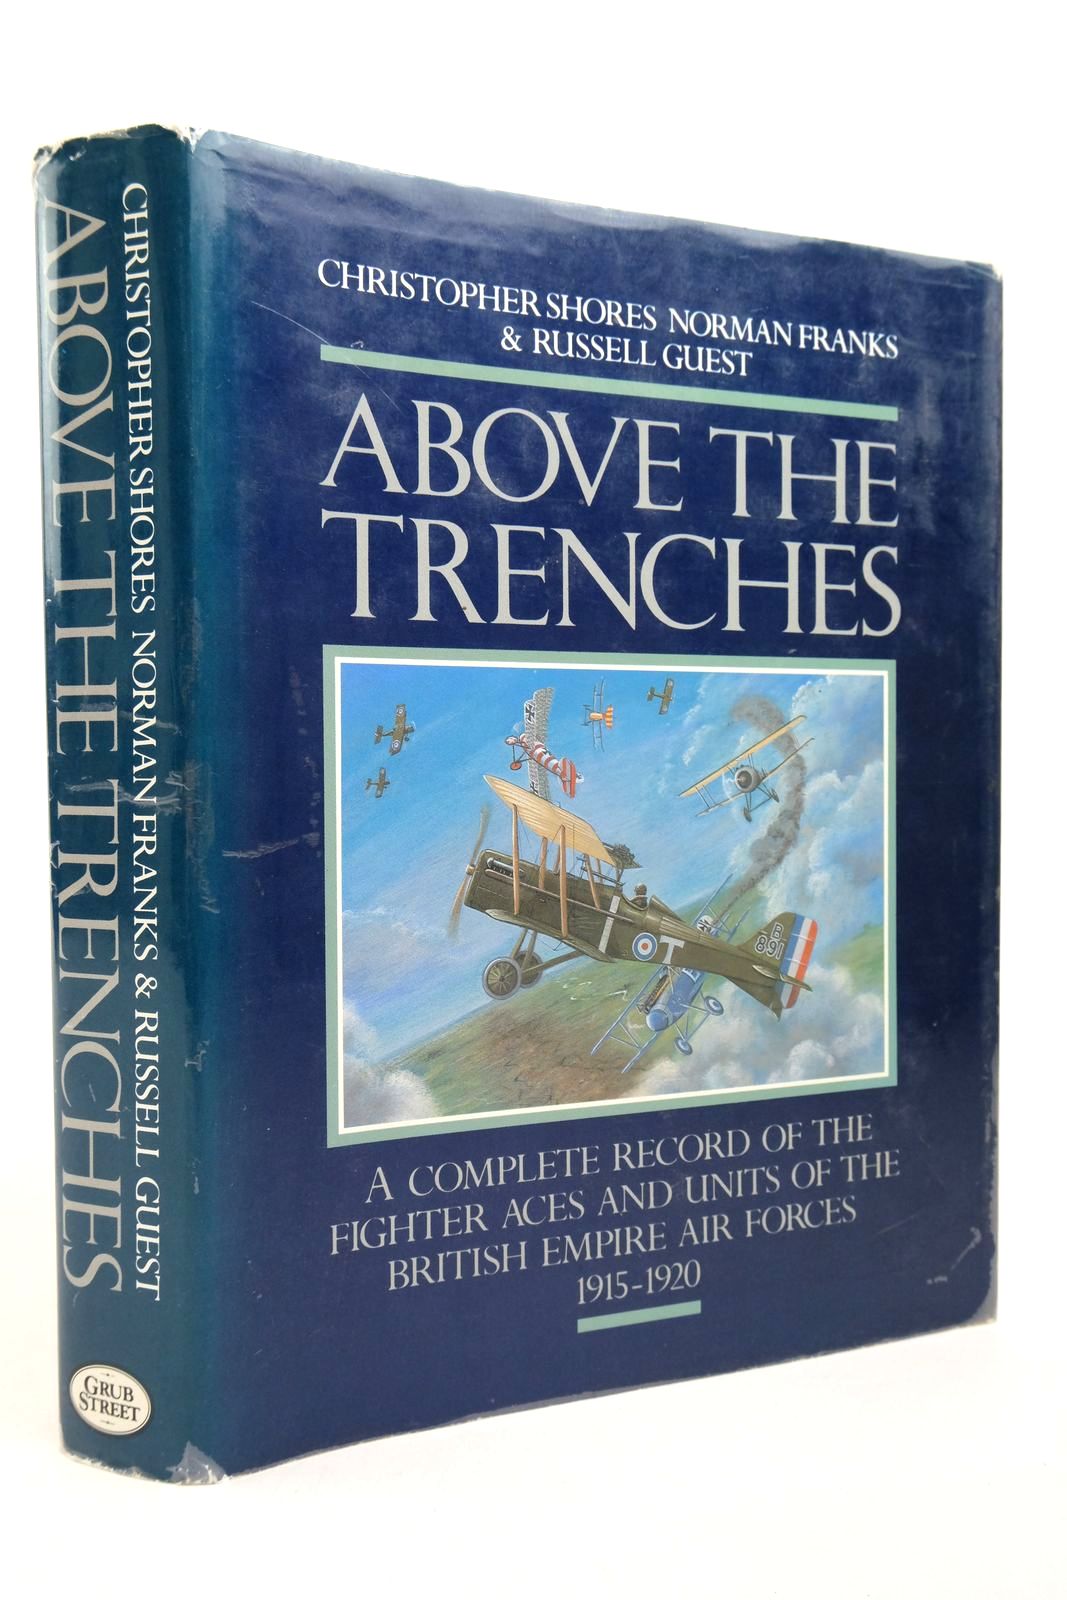 Photo of ABOVE THE TRENCHES written by Shores, Christopher Franks, Norman Guest, Russell published by Grub Street (STOCK CODE: 2139808)  for sale by Stella & Rose's Books